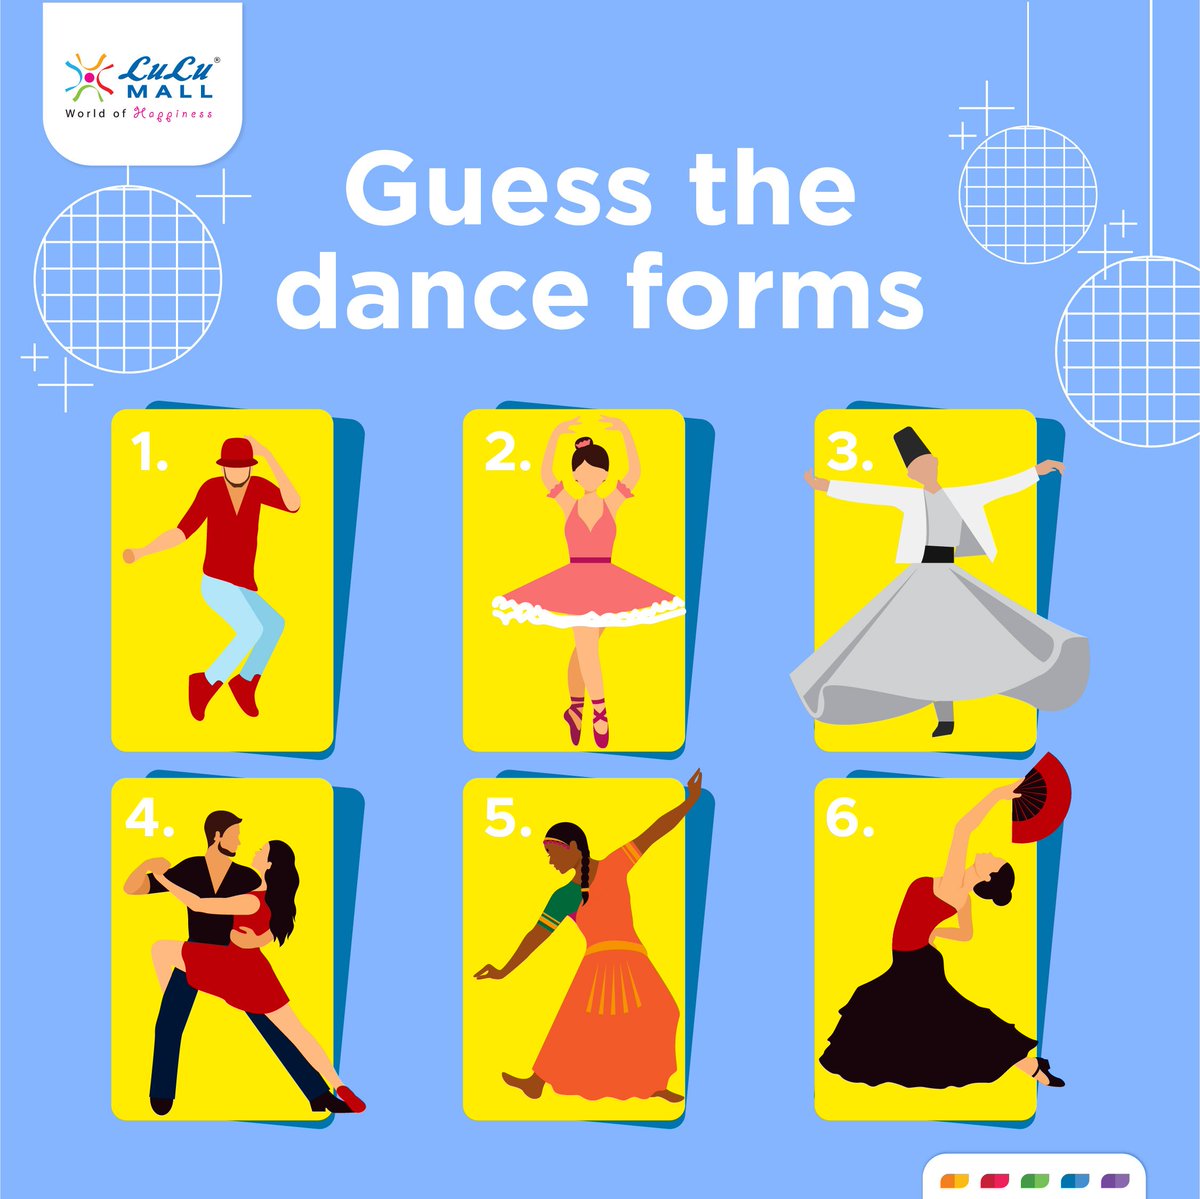 We all love to let loose sometimes and dance our hearts out! Can you identify the dance forms given here? Comment your answers below and win exciting vouchers !

#LuLuMall #LuLu #LuLuMallKochi #DanceDay #Contest #DanceForms #Kochi